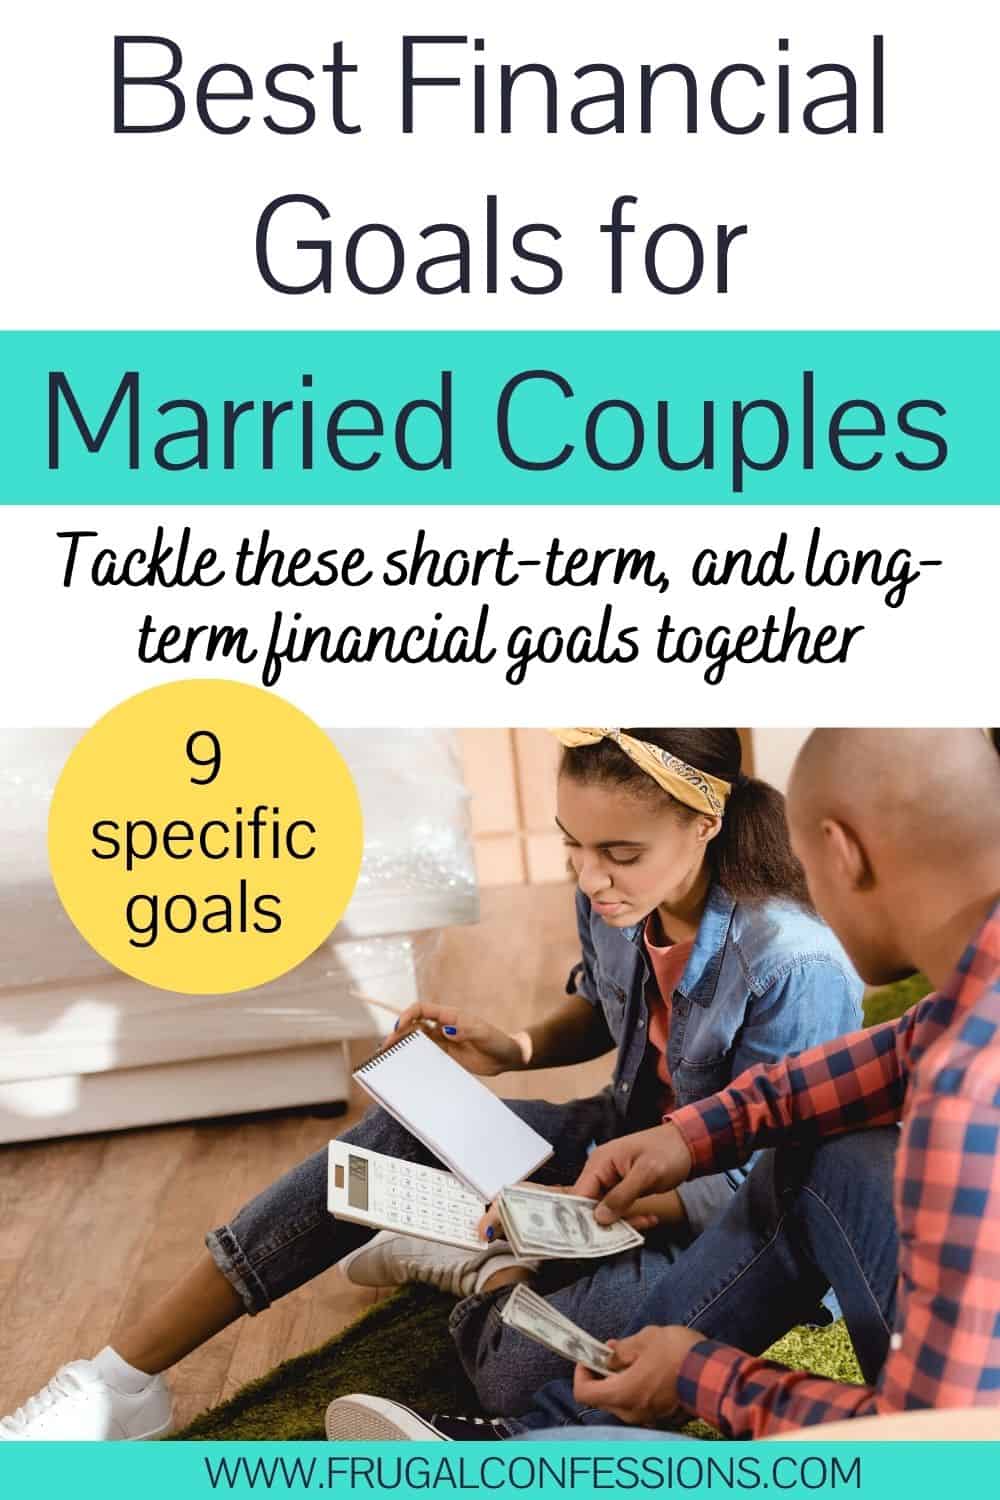 Financial Goals for Married Couples to Conquer Together (9 Ideas)